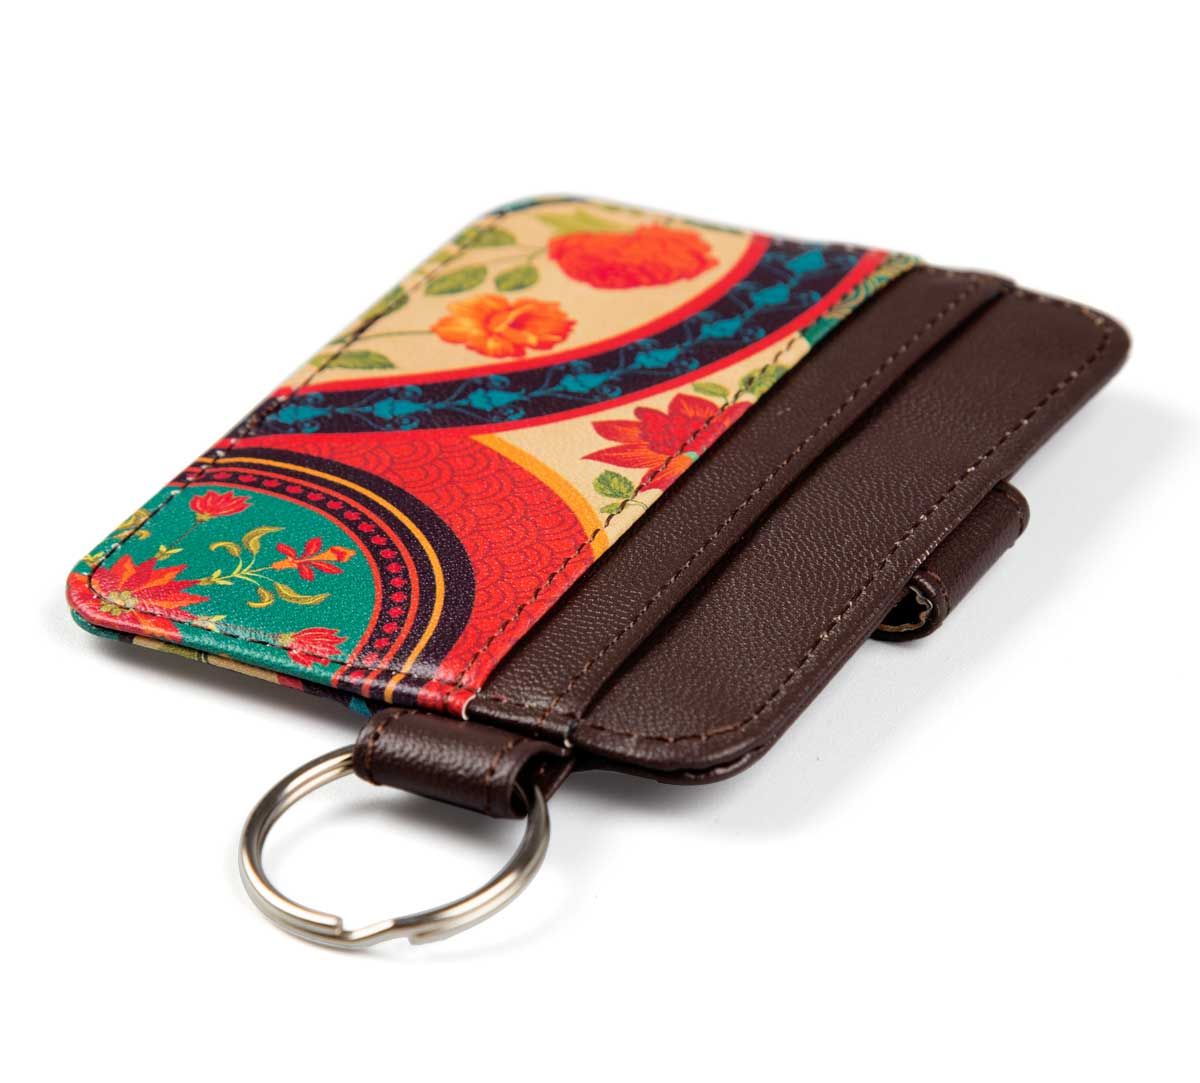 India Circus Floral Embroidery Keychain Card Holder